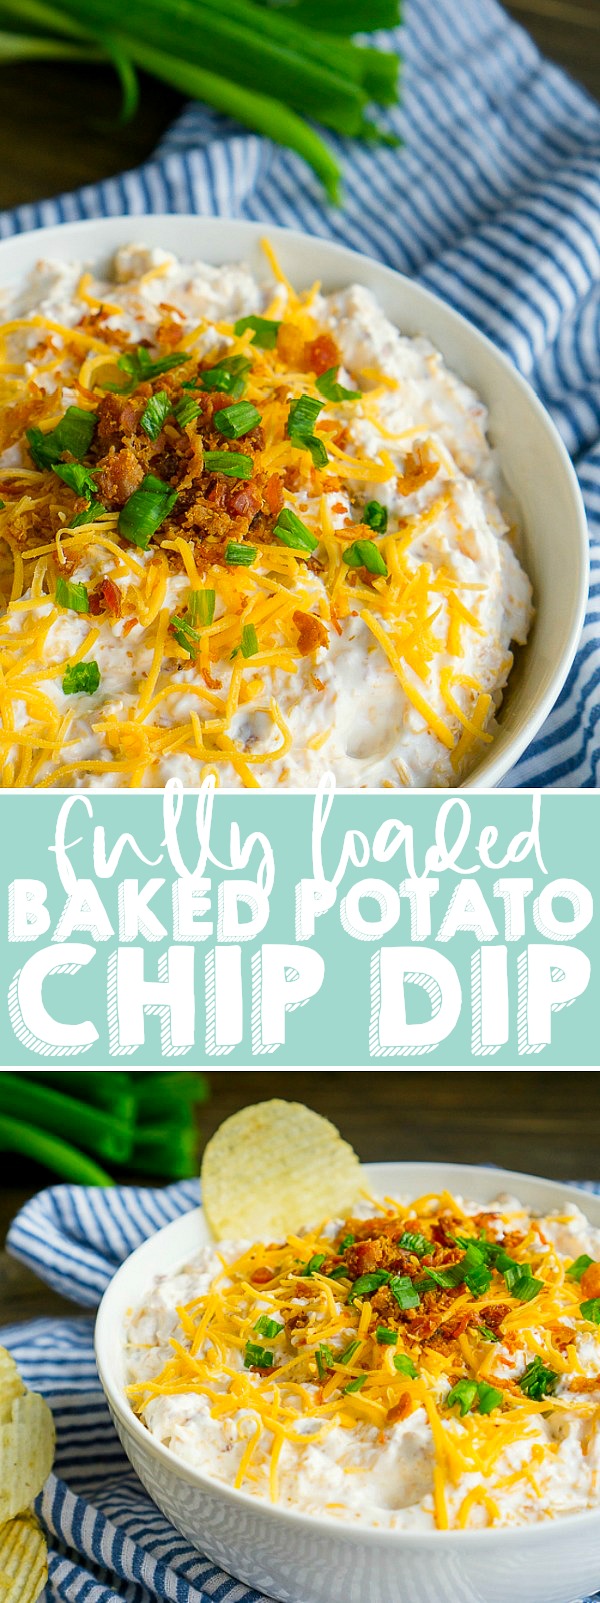 Everyone needs to have their go-to easy chip dip recipe for parties and get togethers, and this loaded potato dip recipe is mine! Add classic baked potato toppings to a sour cream chip dip base and serve on your favorite potato chip. Mix together this party appetizer in 5 minutes and enjoy! | THE LOVE NERDS #chipdip #gameday #appetizer 